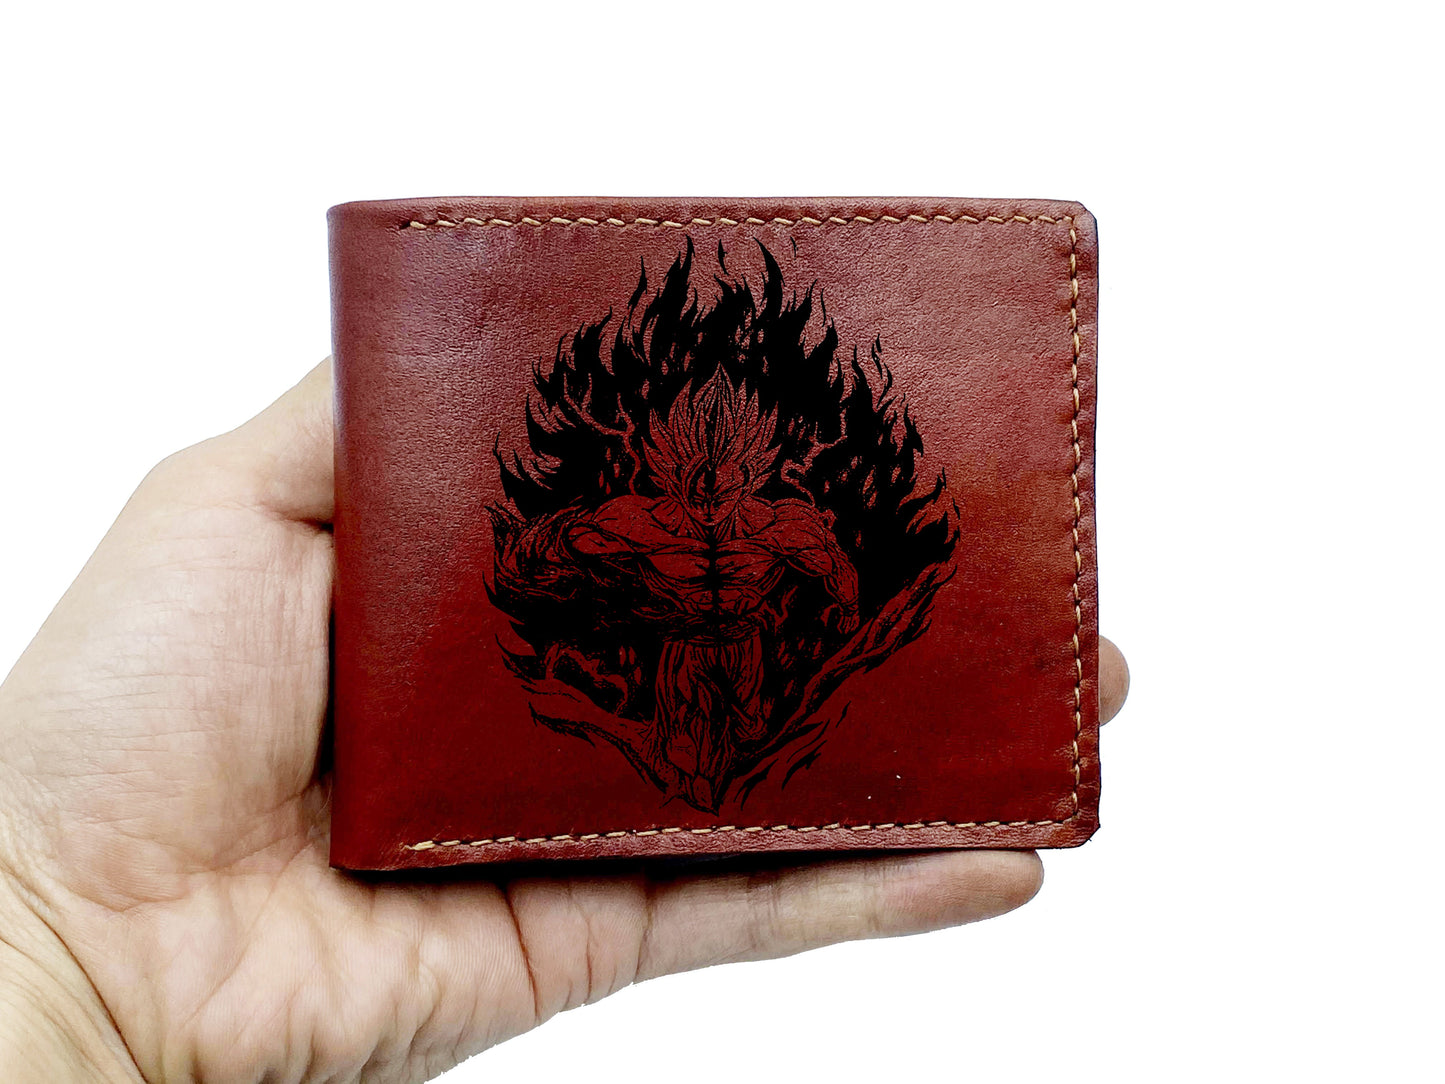 Mayan Corner - Personalized leather gift for brother, Trunks dragon ball super saiyan wallet, cool wallet for husband, boy